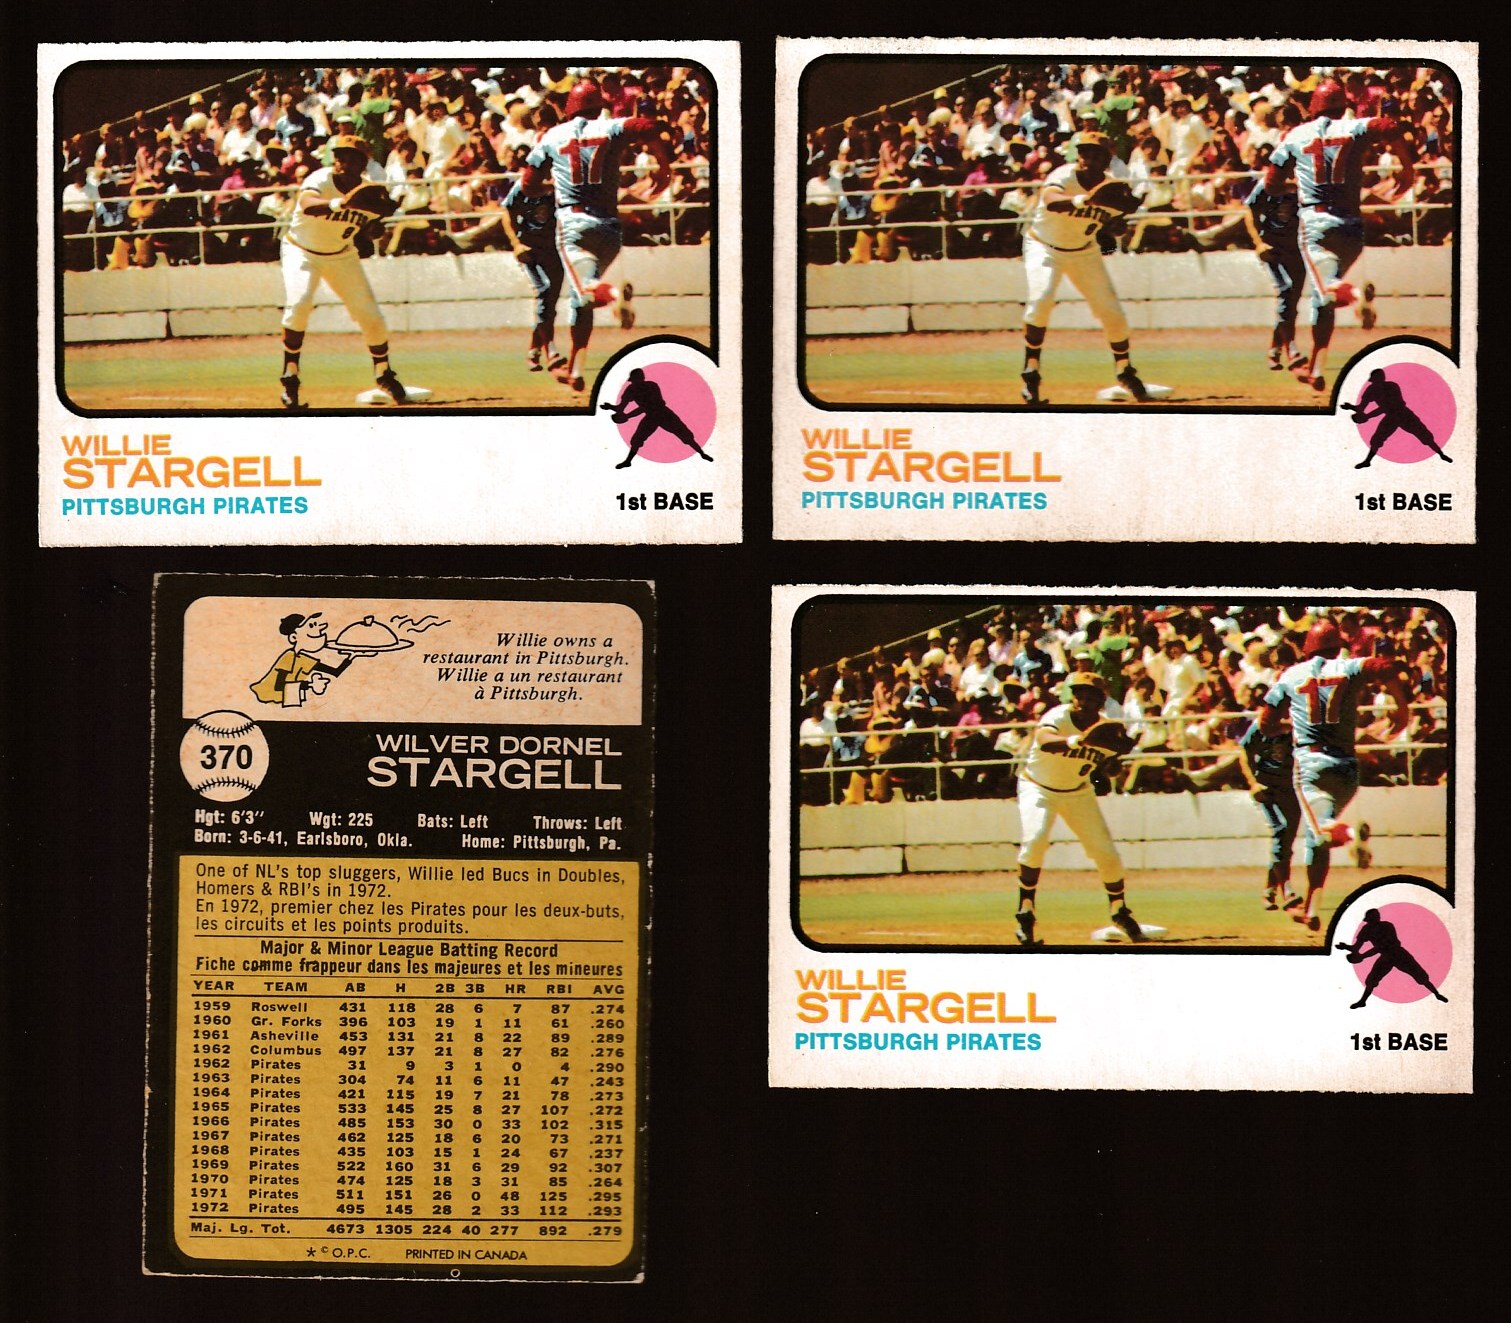 1973 O-Pee-Chee/OPC #370 Willie Stargell (Pirates) Baseball cards value